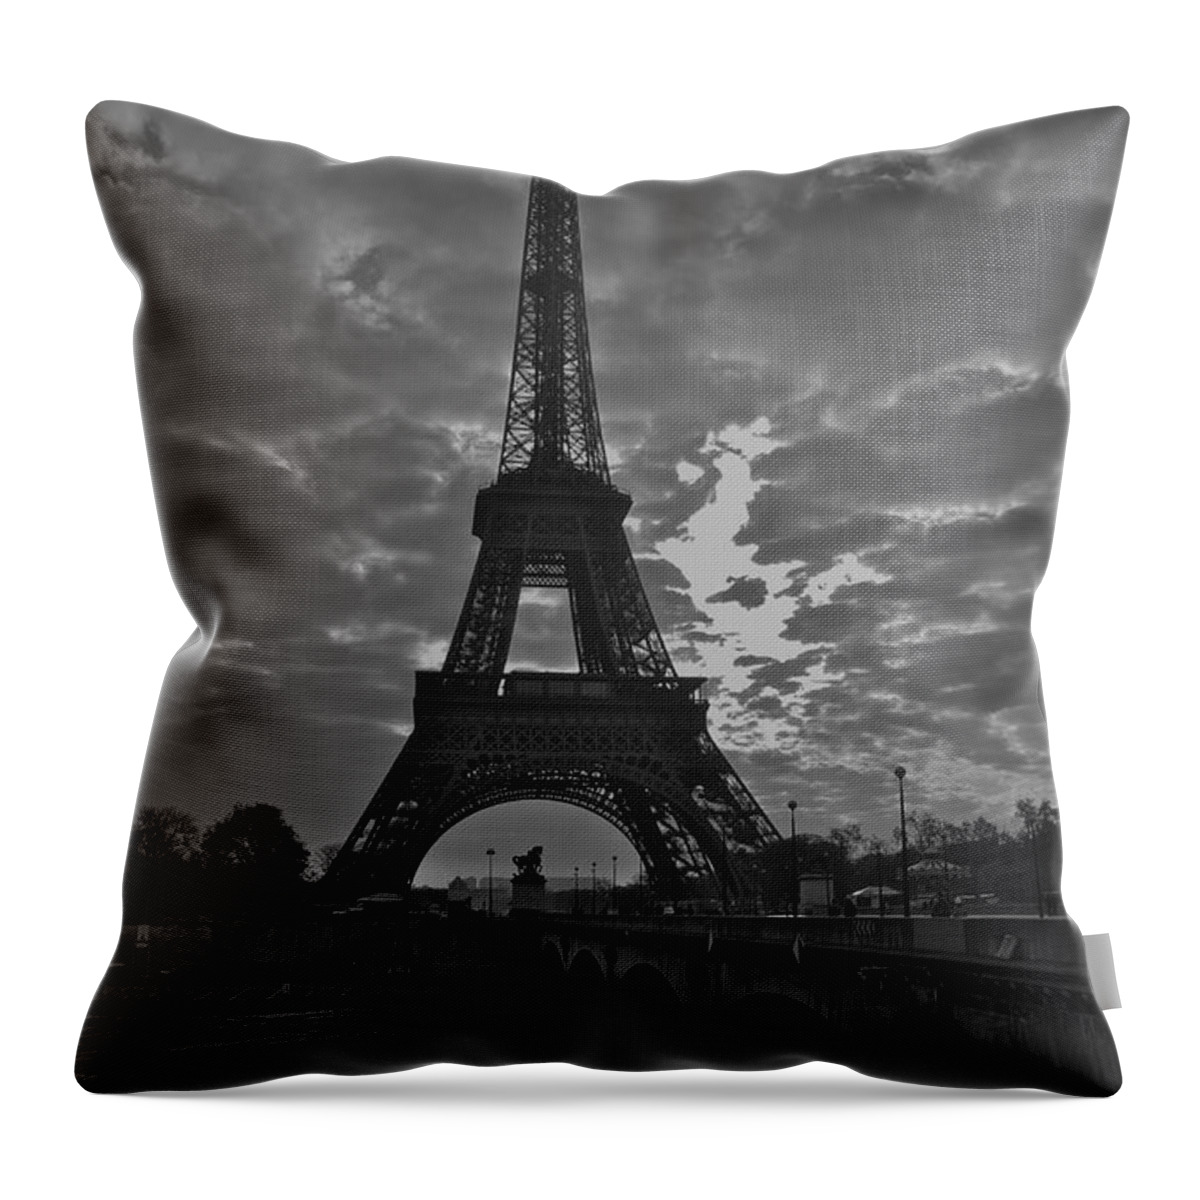 Eiffel Tower Throw Pillow featuring the photograph Morning Light by Eric Tressler